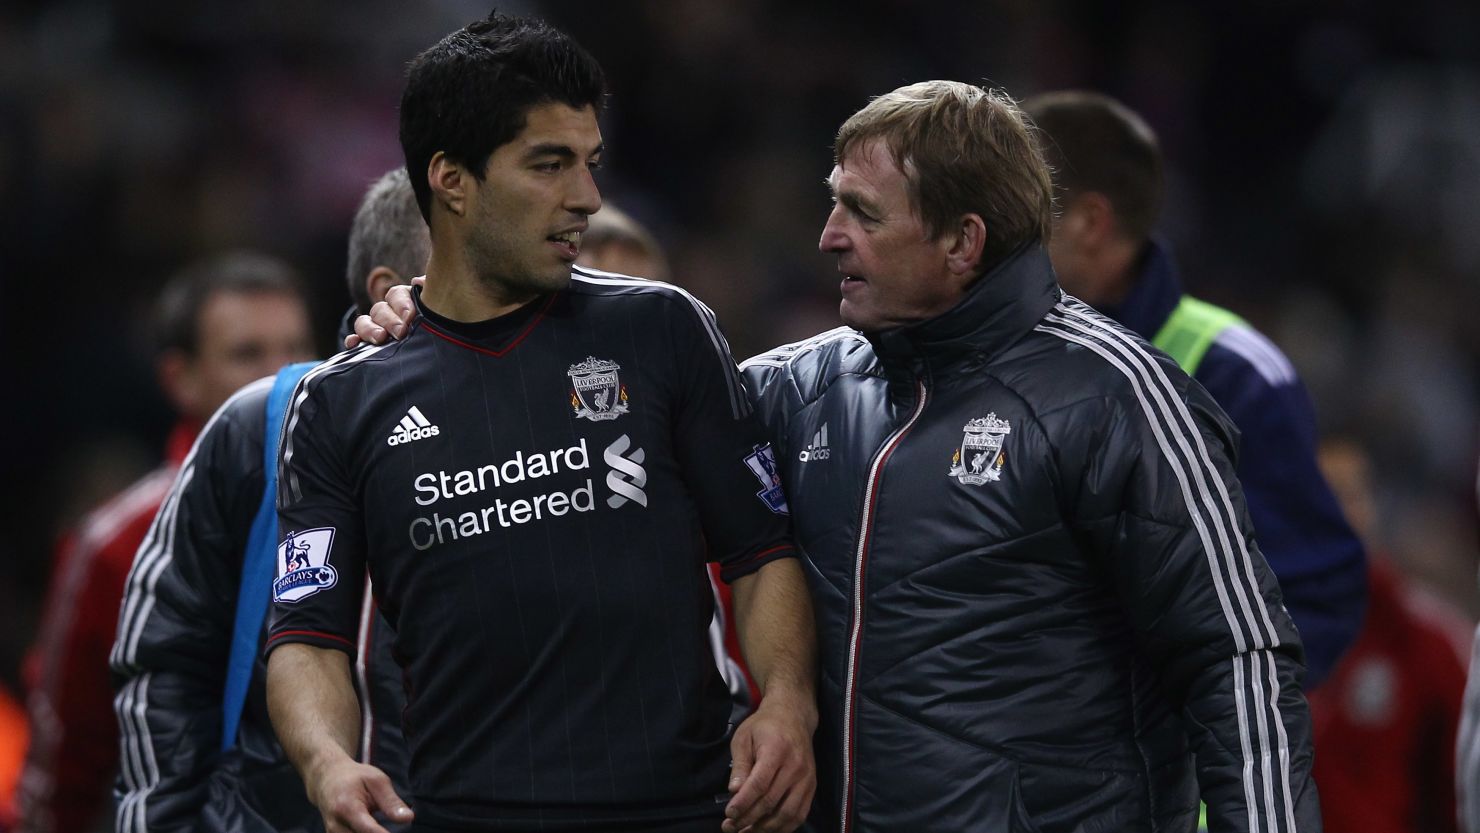 Luis Suarez and Liverpool manager Kenny Dalglish issued apologies on Sunday following the striker's handshake snub on Saturday